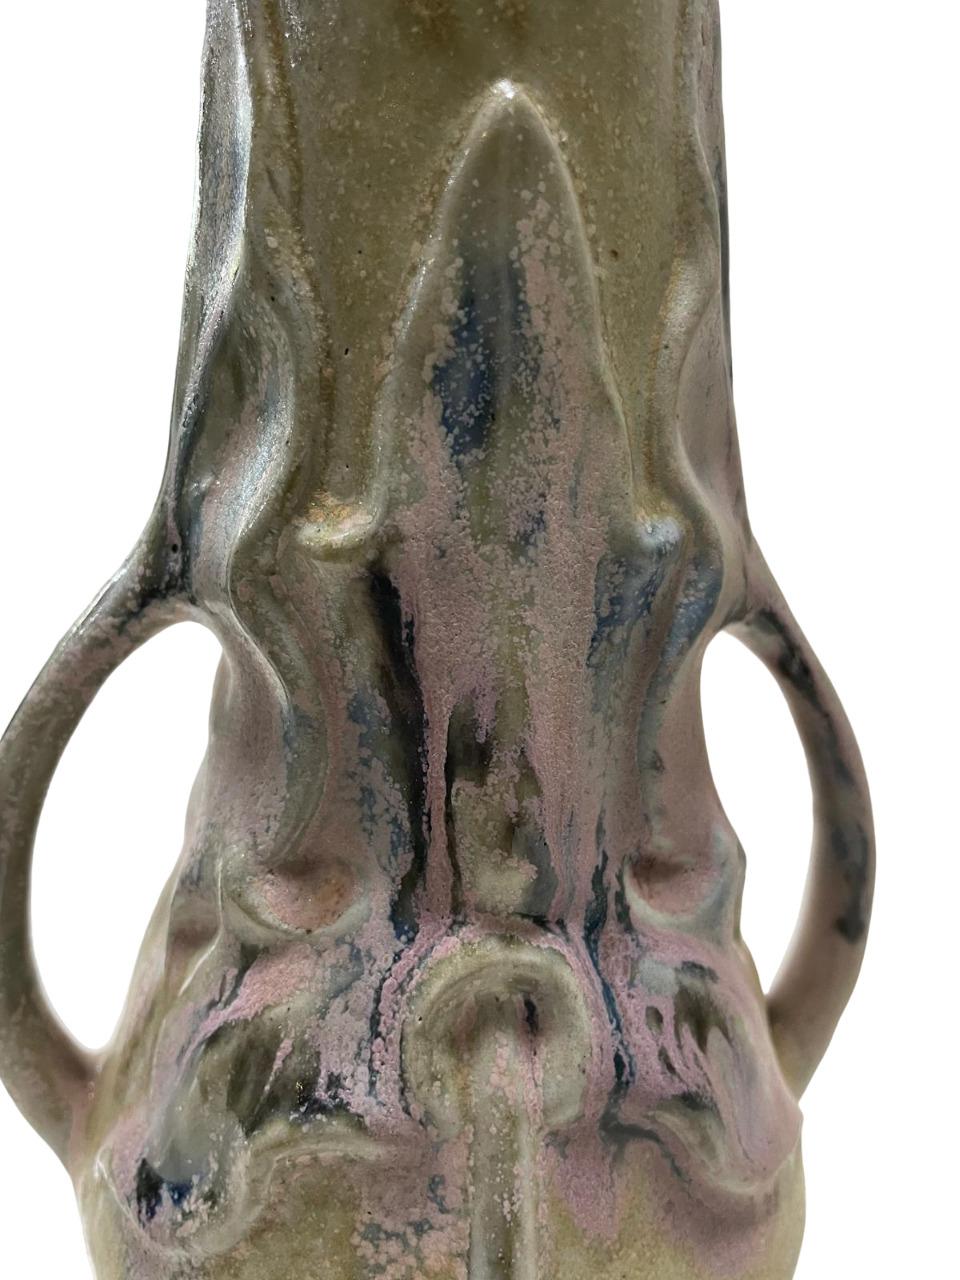 ART NOUVEAU two-handled GREBER Vase, with some pink flashes, refined ceramic For Sale 11